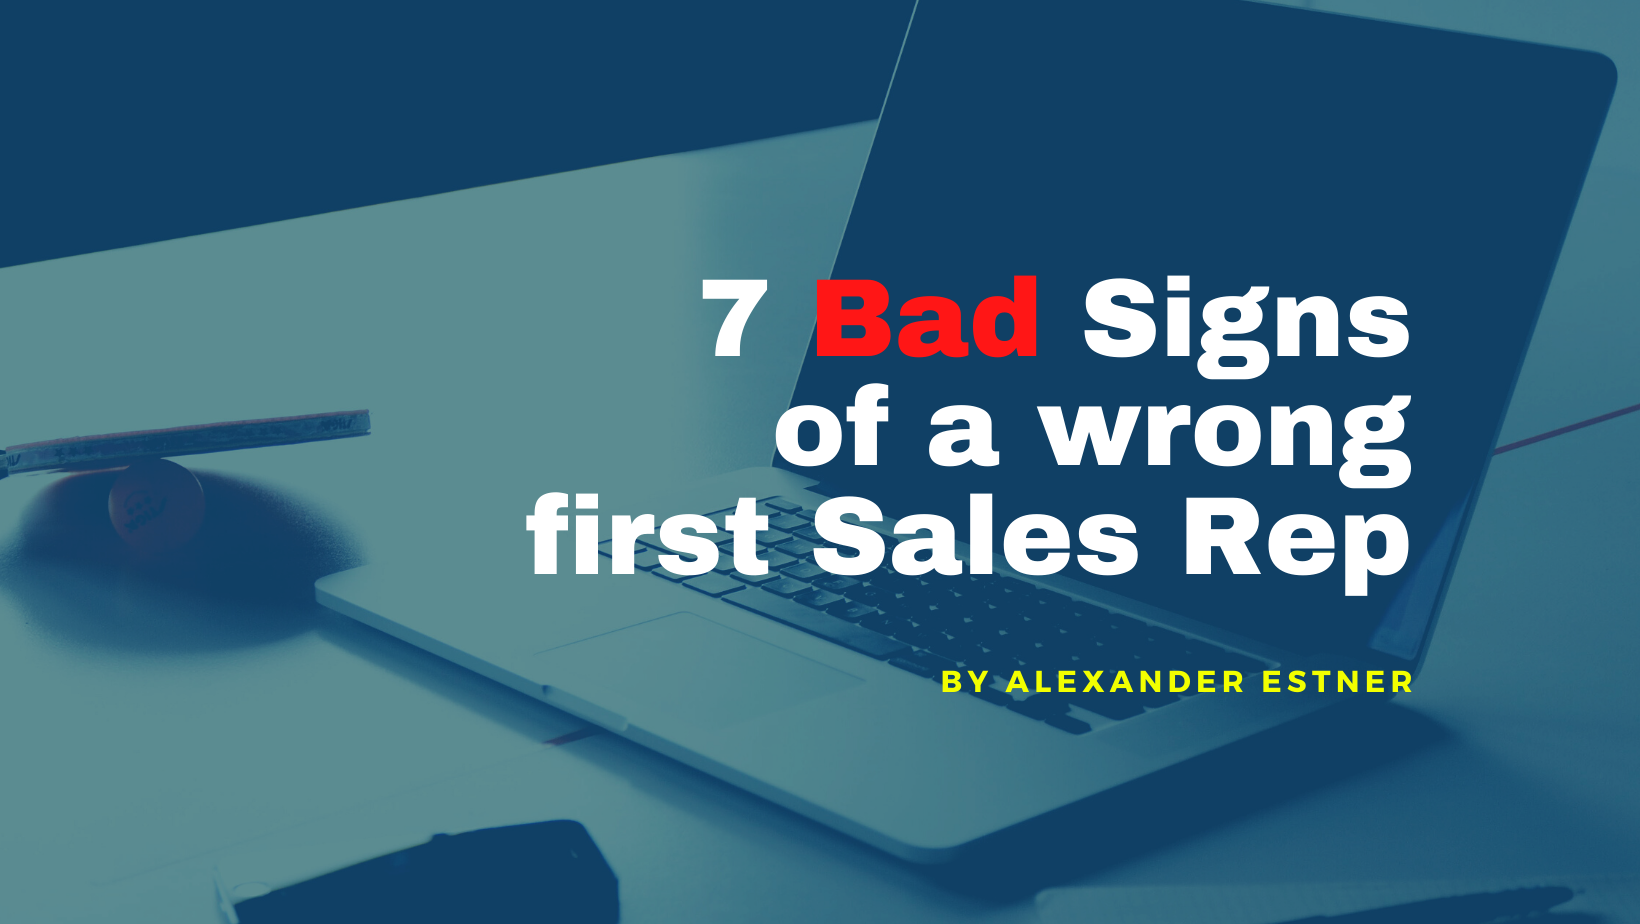 7 Bad Signs of a wrong first Sales Rep